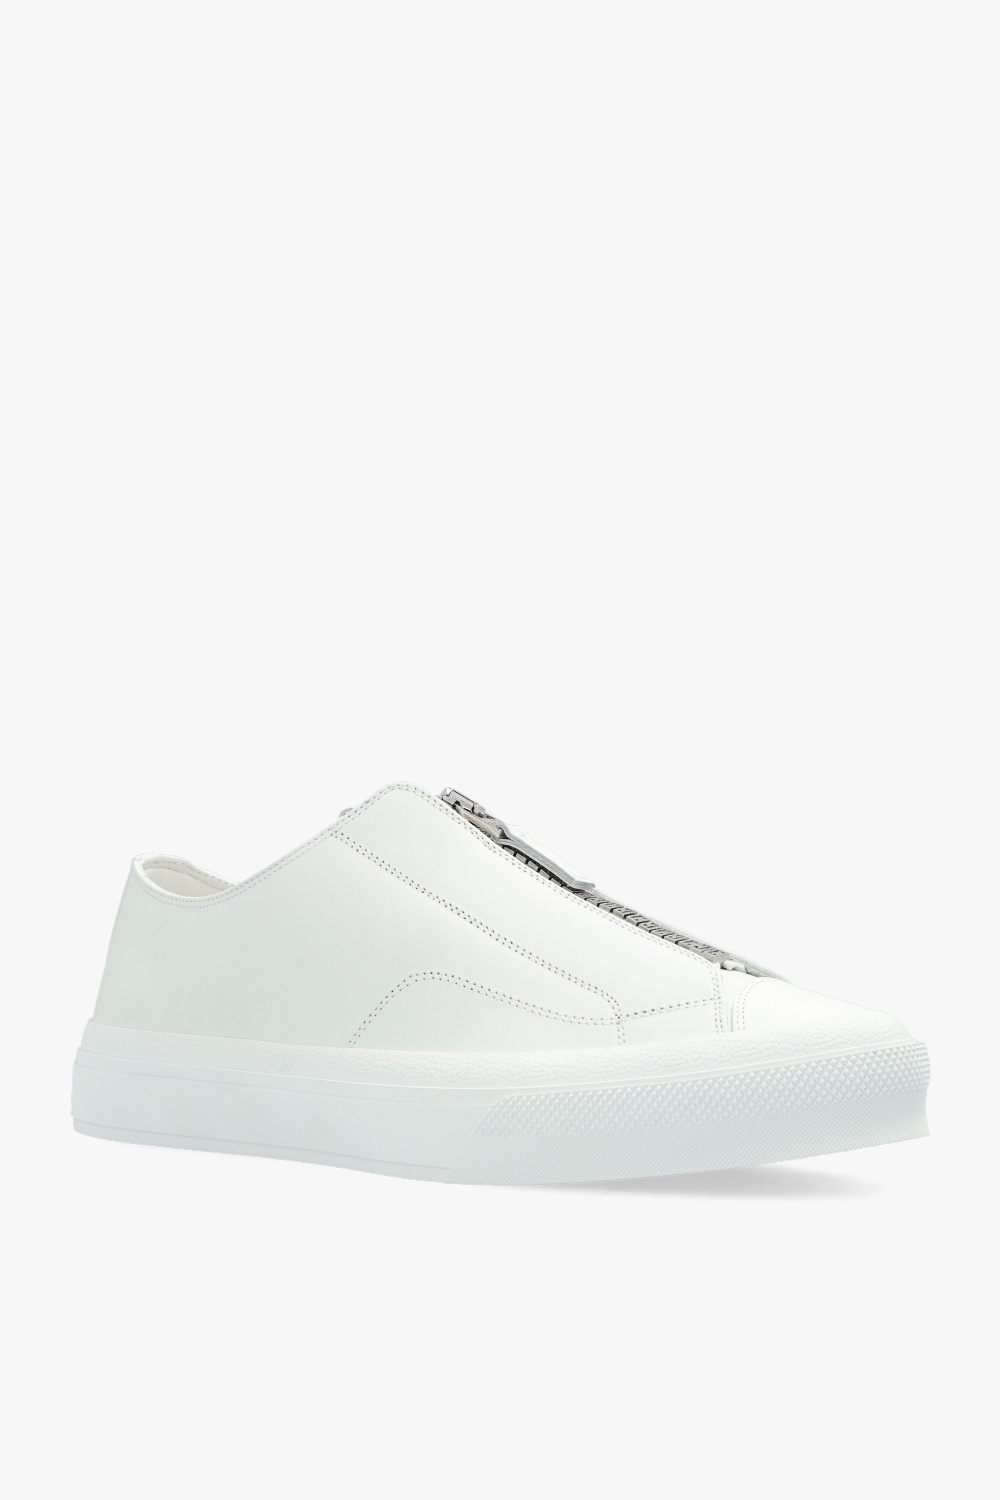 givenchy RZANE ‘City’ sneakers